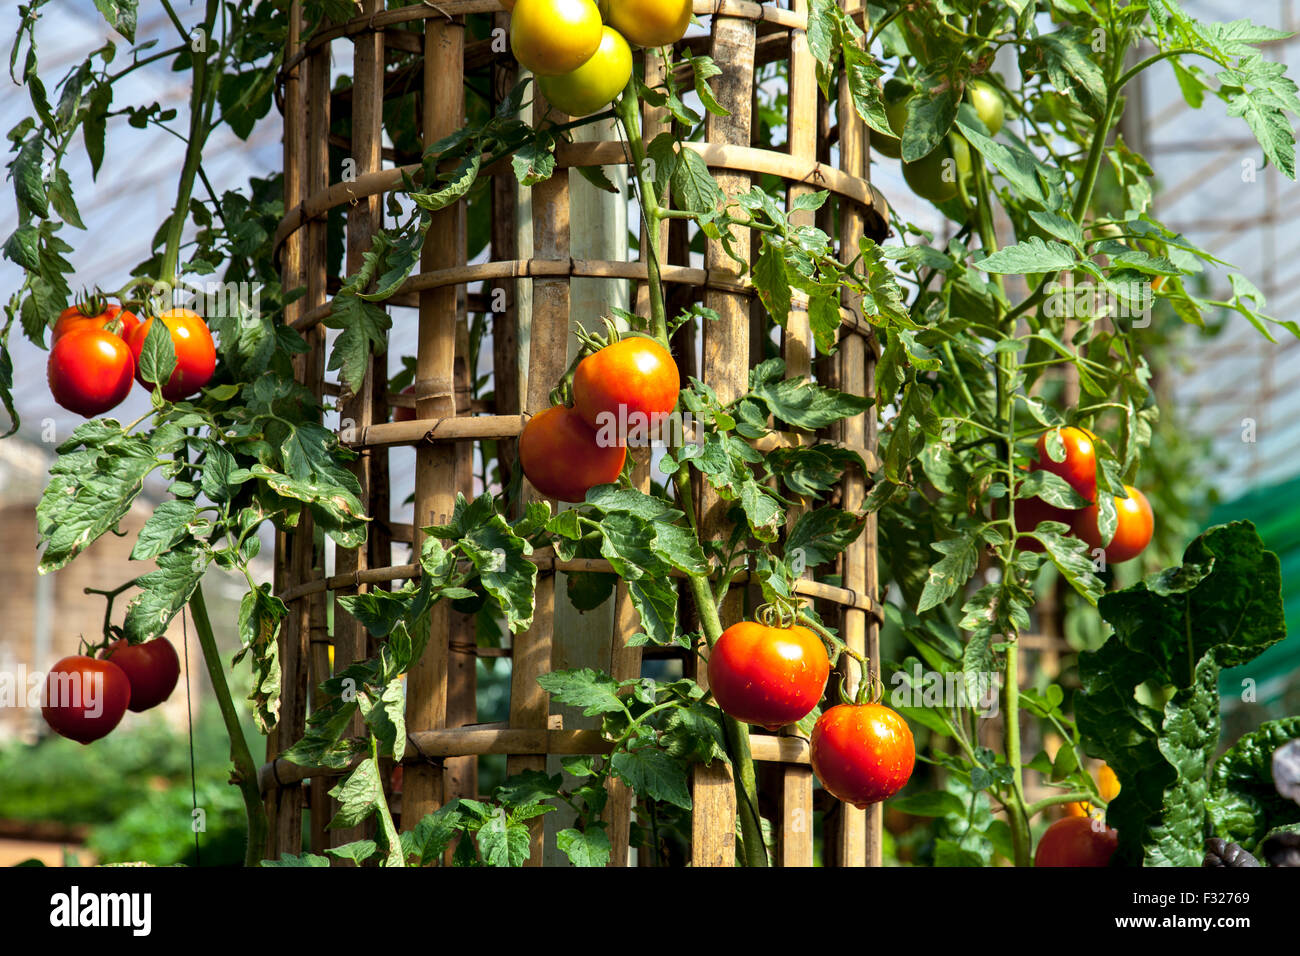 red ripe tomatoes on the bushes Stock Photo